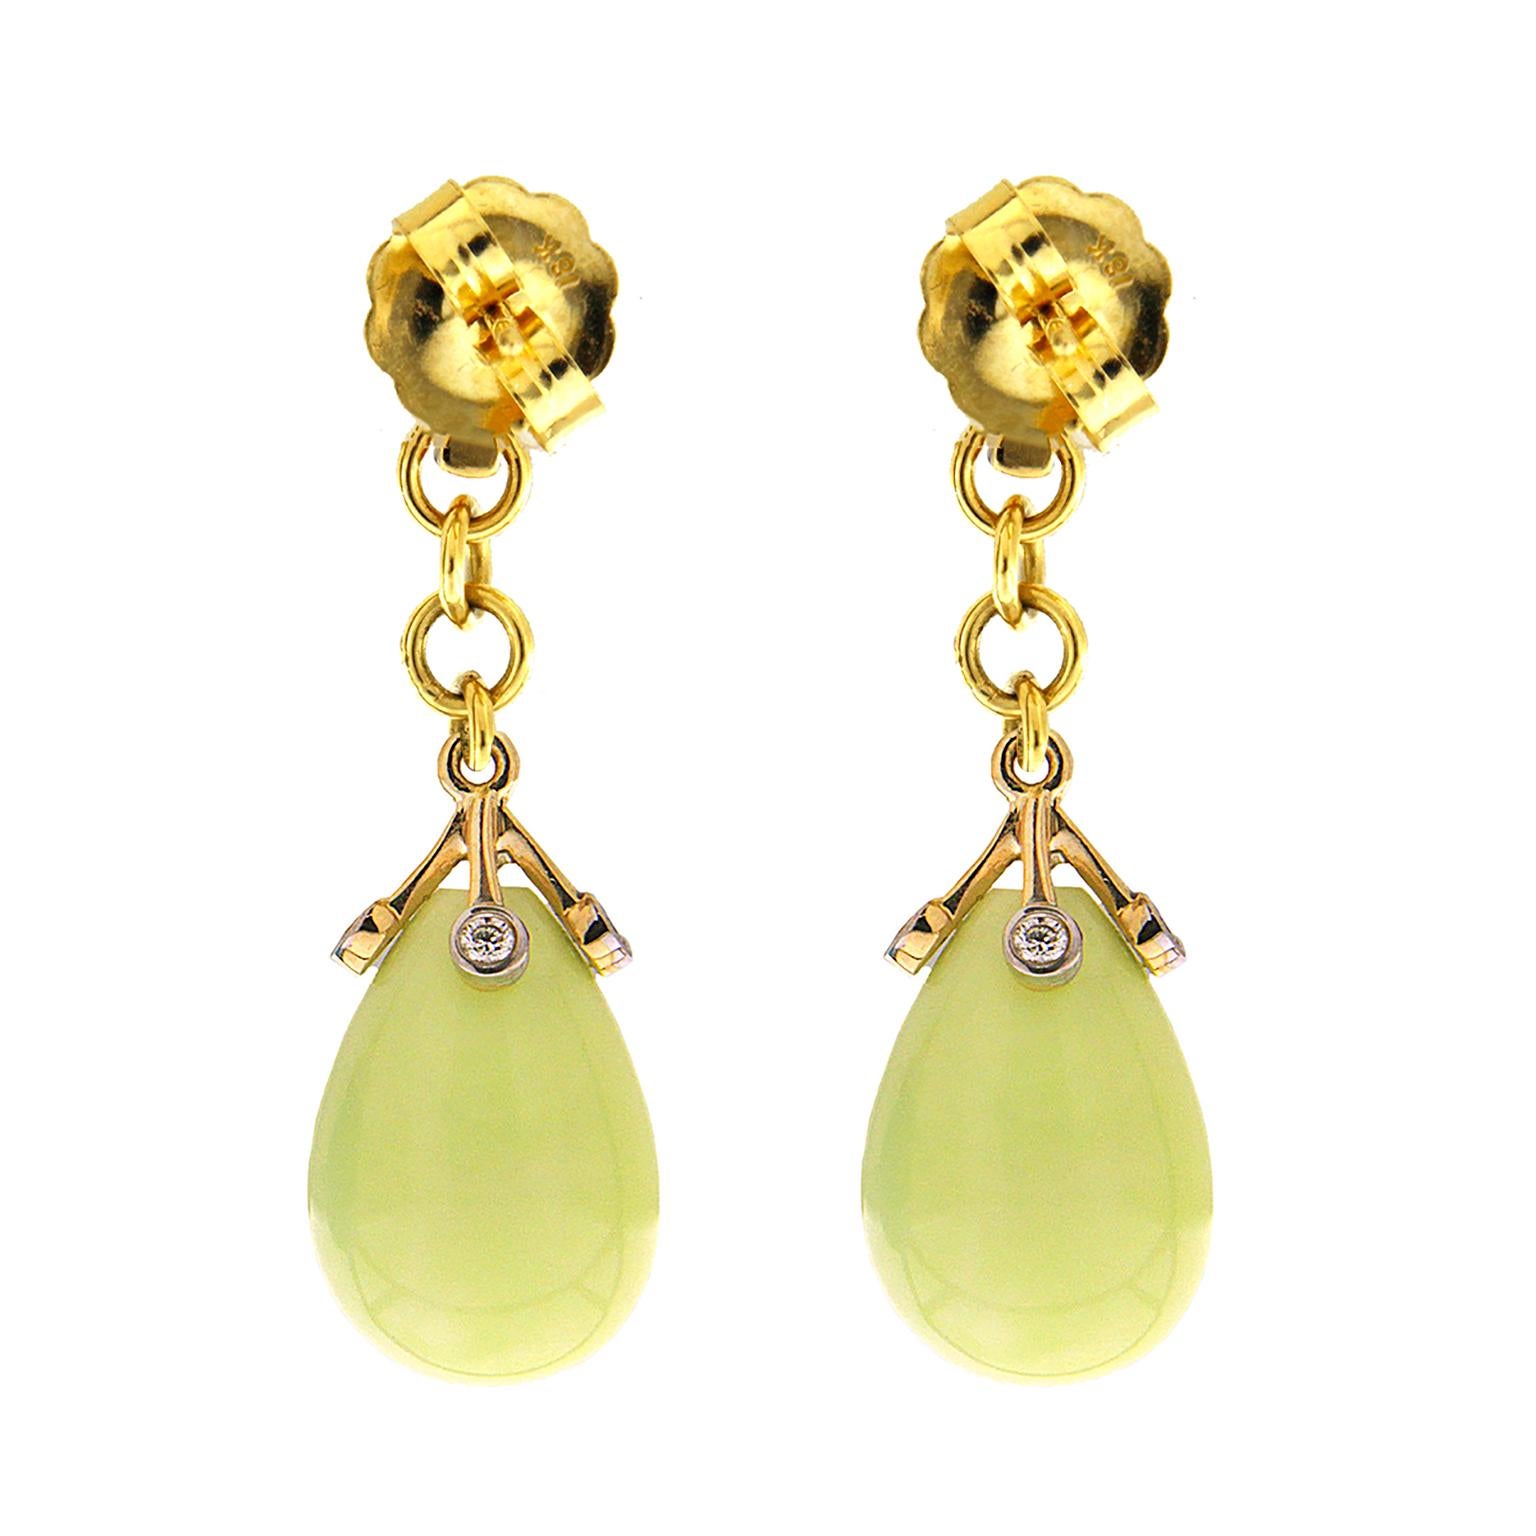 Chrysoprase adds green tones to these drop earrings. The upper half is made of graduated 18k yellow gold links with a hoop on one end and bars on the other. Each strip is tipped with bezel set round brilliant cut diamonds. Between the diamonds hangs